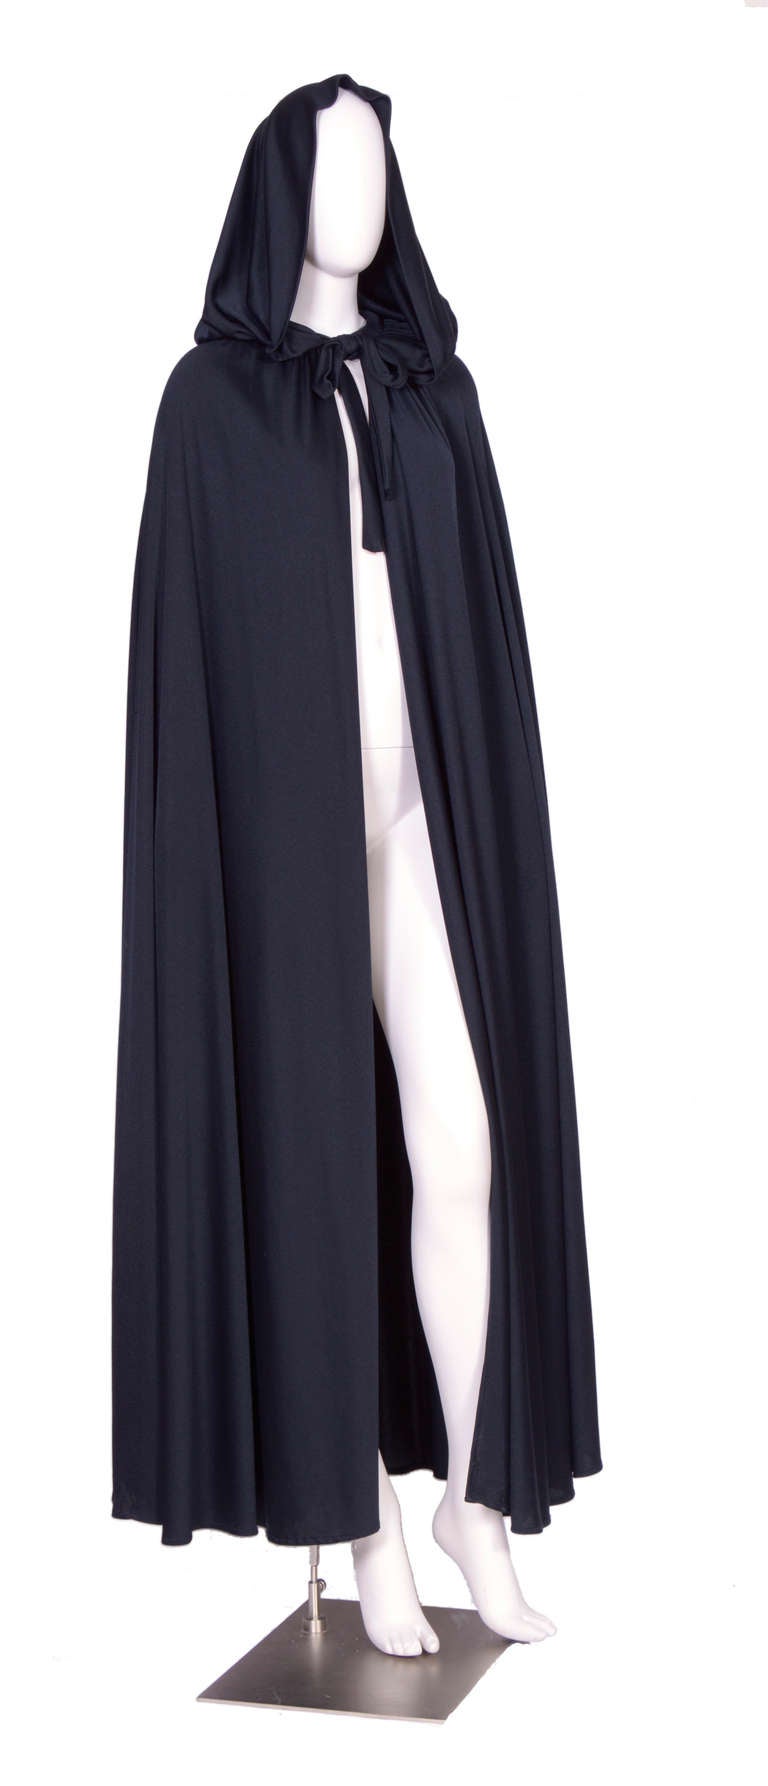 Vintage black cape by Loris Azzaro made in a poly jersey. 
The total length is 60inch. Excellent condition